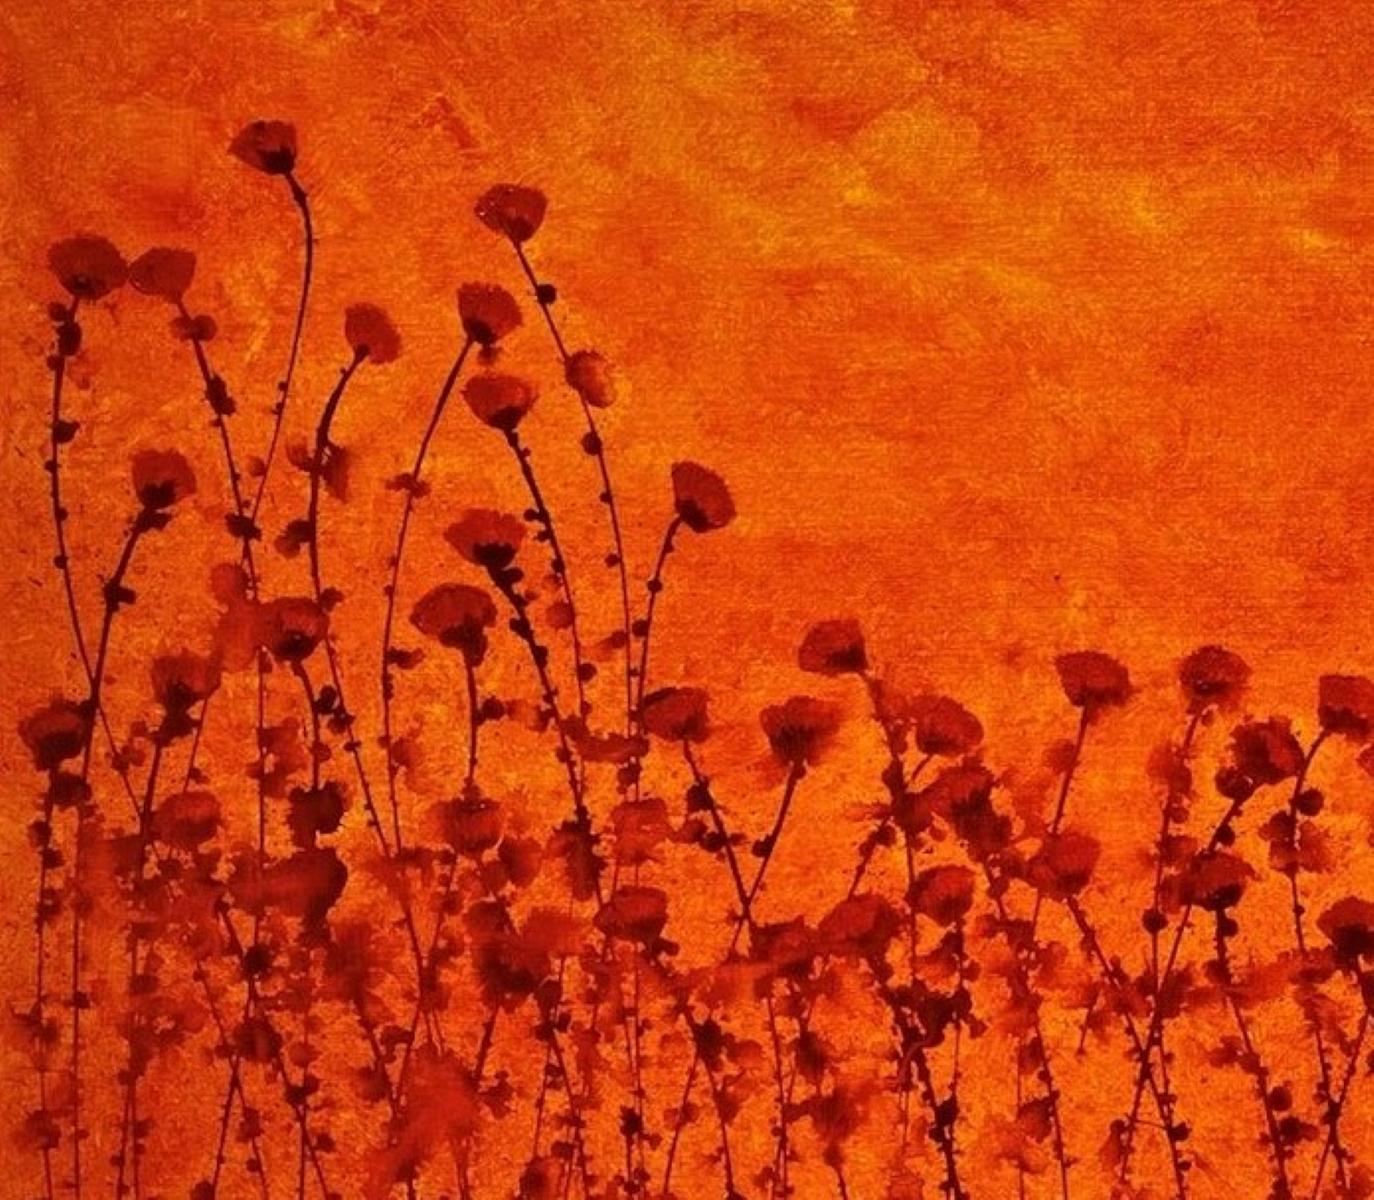 Passion is an ink and acrylic on canvas work by Belgian artist Jean Francois Debongnie. This painting captures the blossoming scene of the little wild red flowers in the field during sunset. The orange hue gives a passionate vibe that lifts spirit